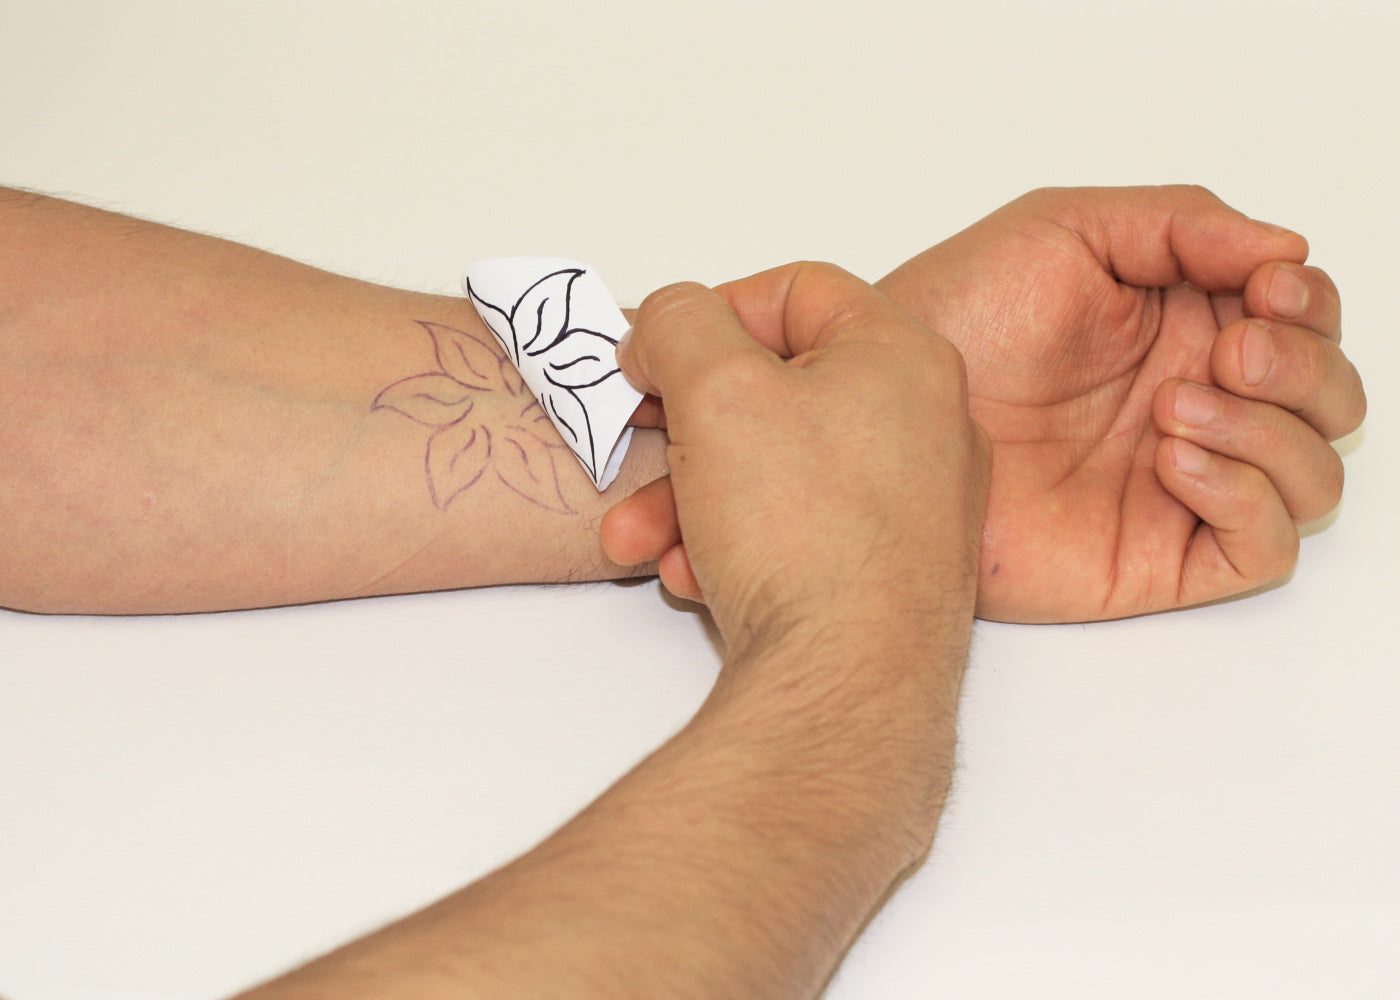 How To Make A Tattoo Stencil  AuthorityTattoo